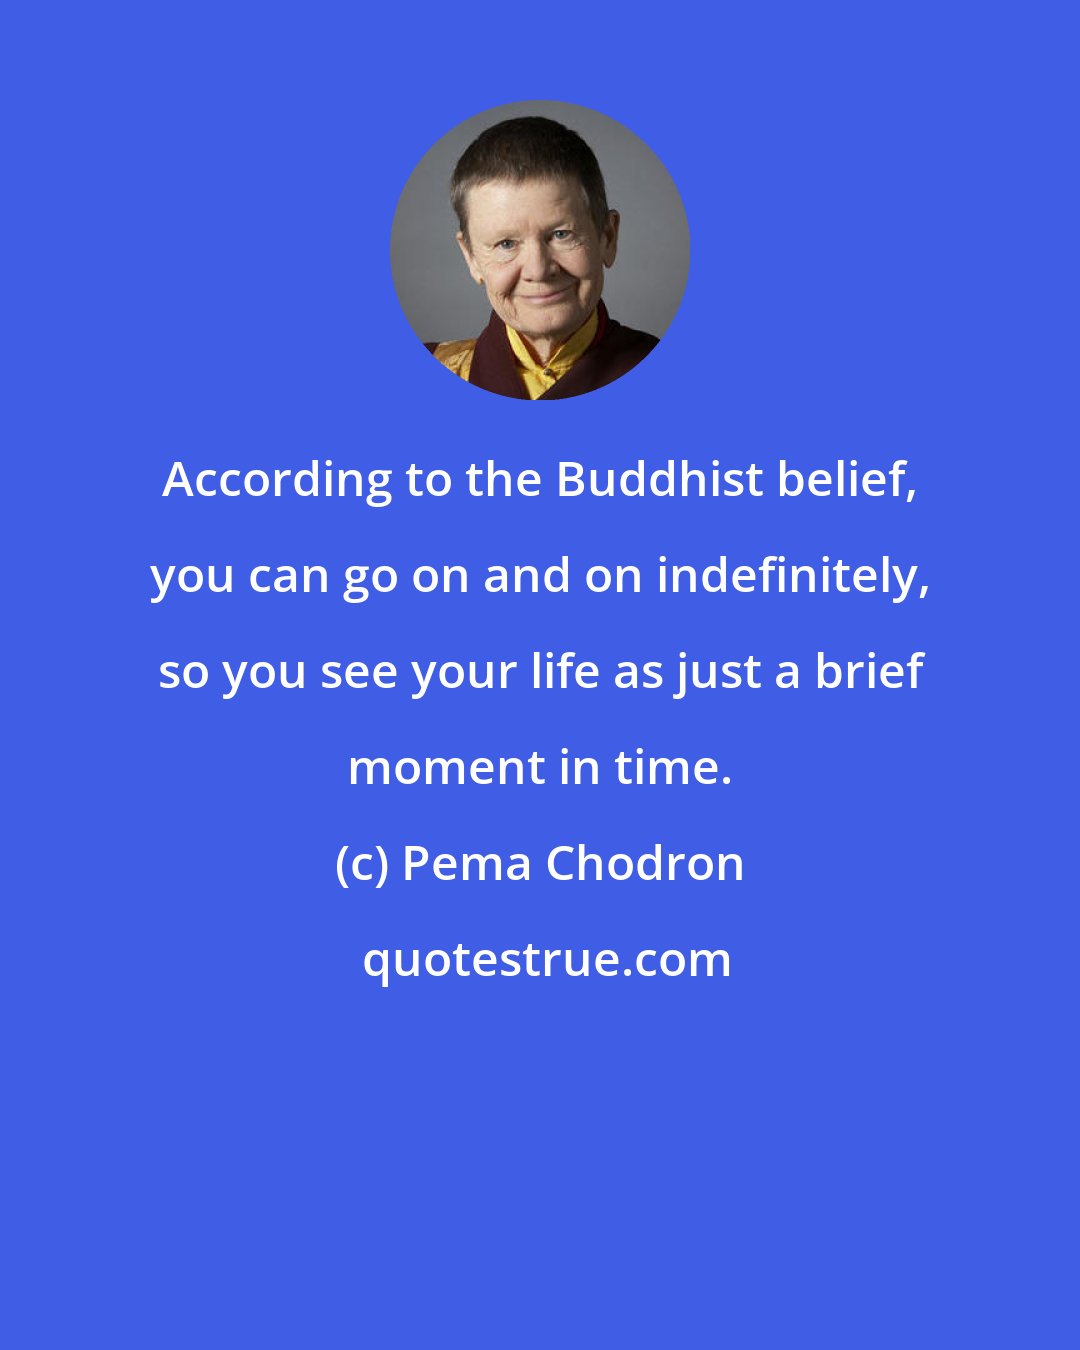 Pema Chodron: According to the Buddhist belief, you can go on and on indefinitely, so you see your life as just a brief moment in time.